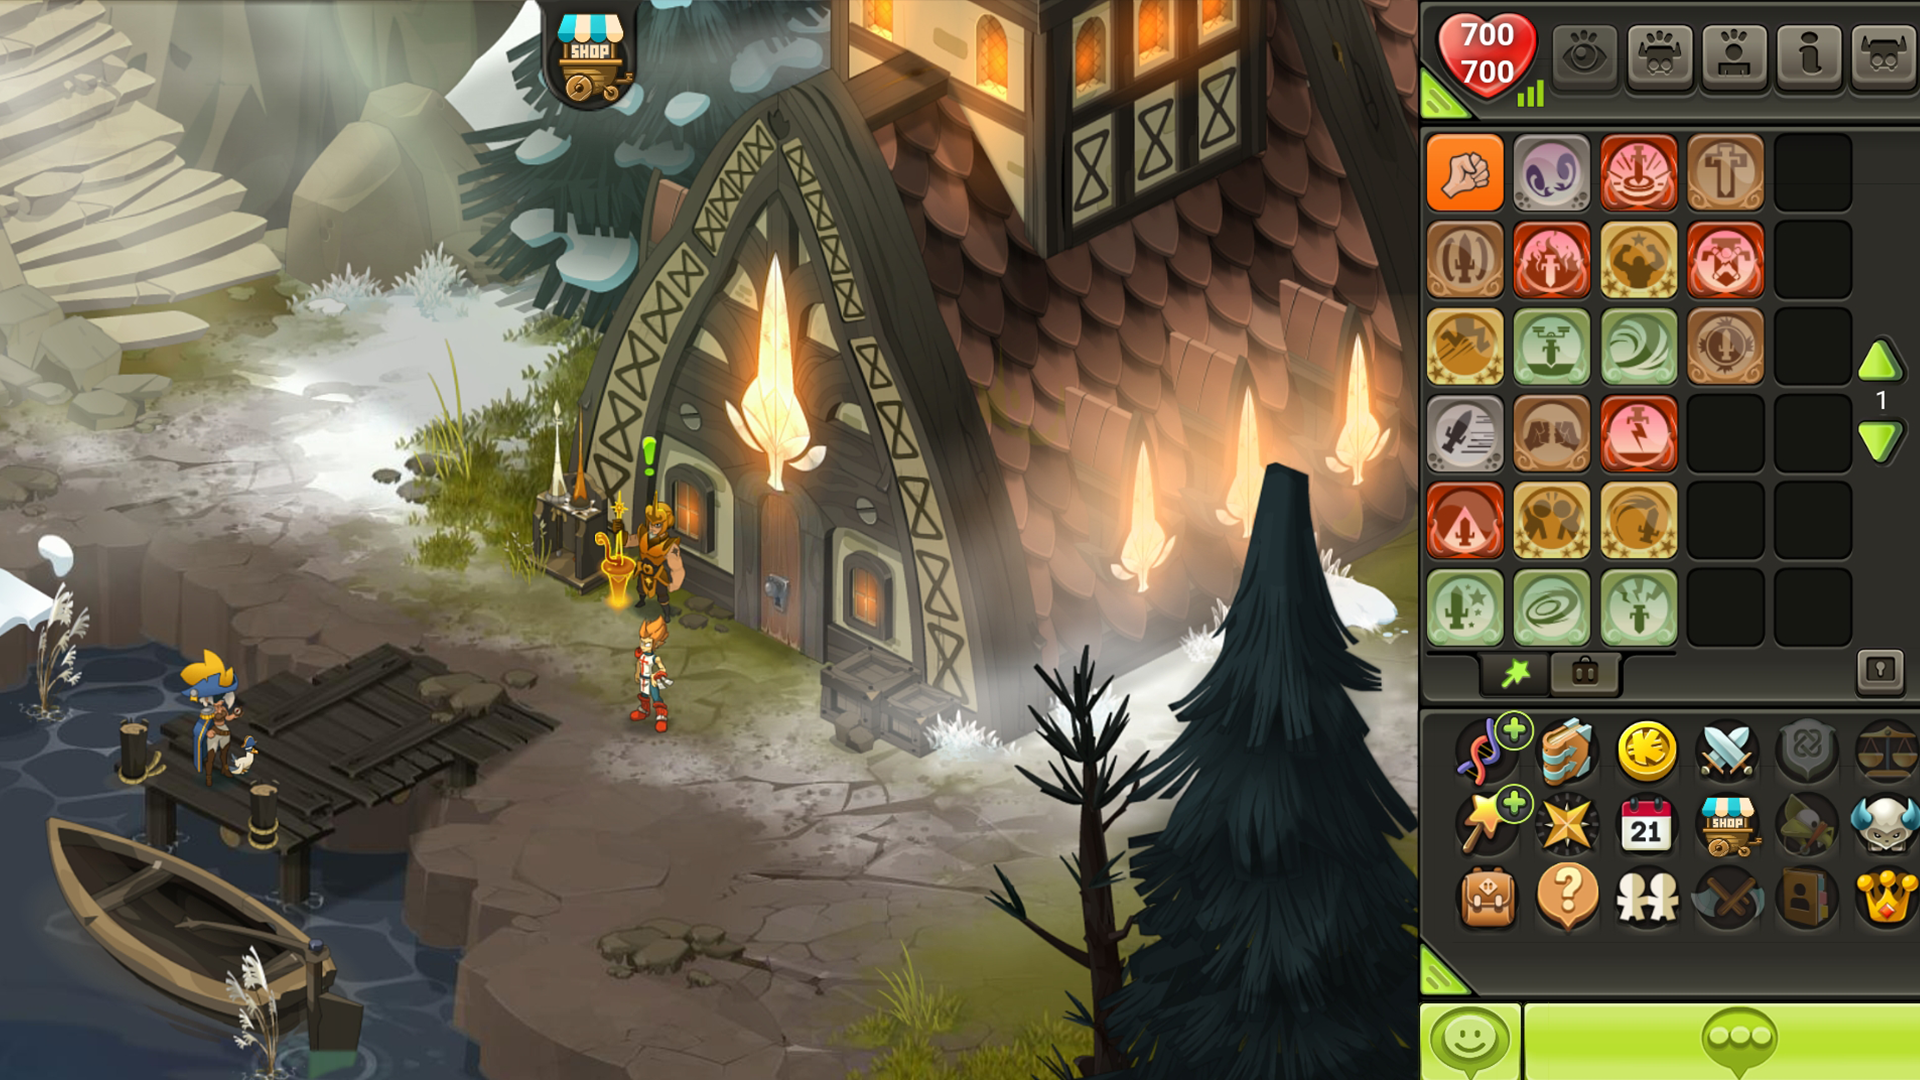 Role-playing Games That Are NOT Auto-play - Albion Online - DOFUS Touch -  TapTap - TapTap